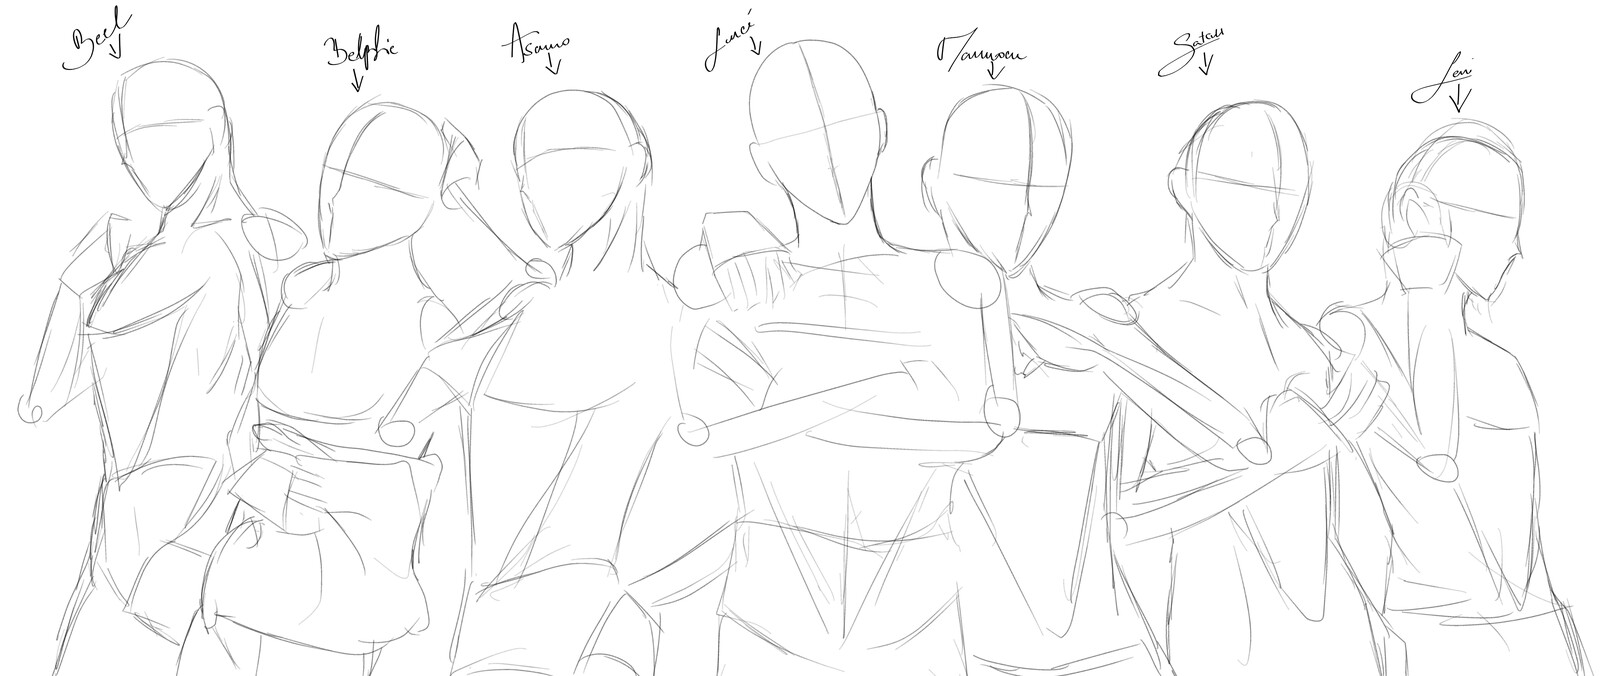 Group poses wip by rika-dono on DeviantArt